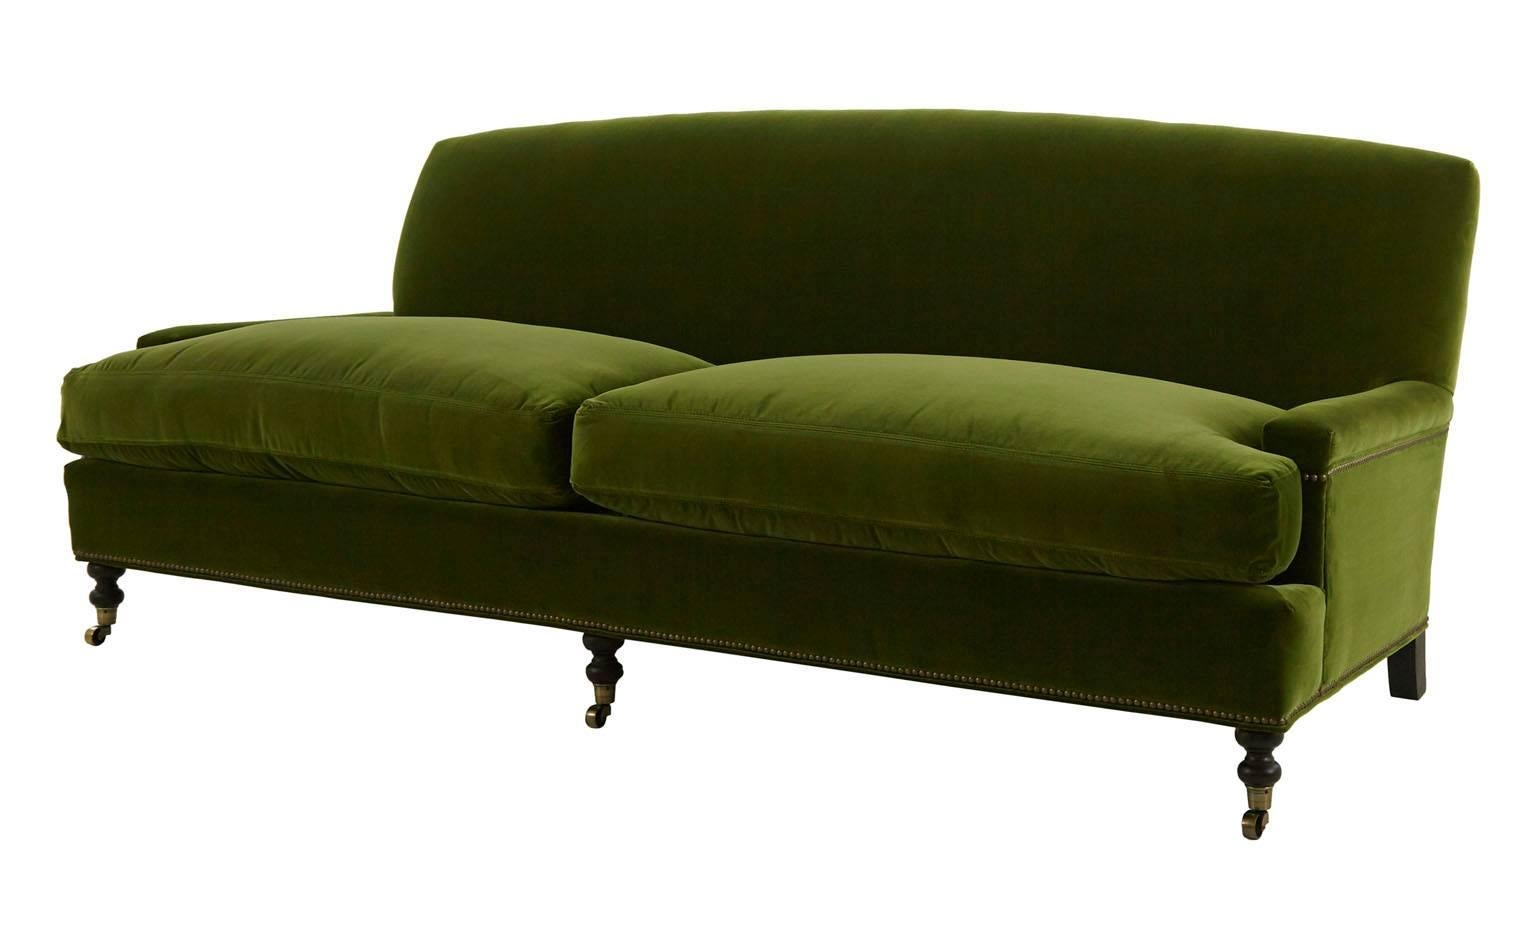 Upholstered in Marco-jade velvet.
Fabric content: 100% cotton.
Black walnut wood finish.
Antique brass nailheads. 
Antique brass casters.
Includes down and feather cushion upgrade.
Sustainable construction.

Dimensions
overall: 88